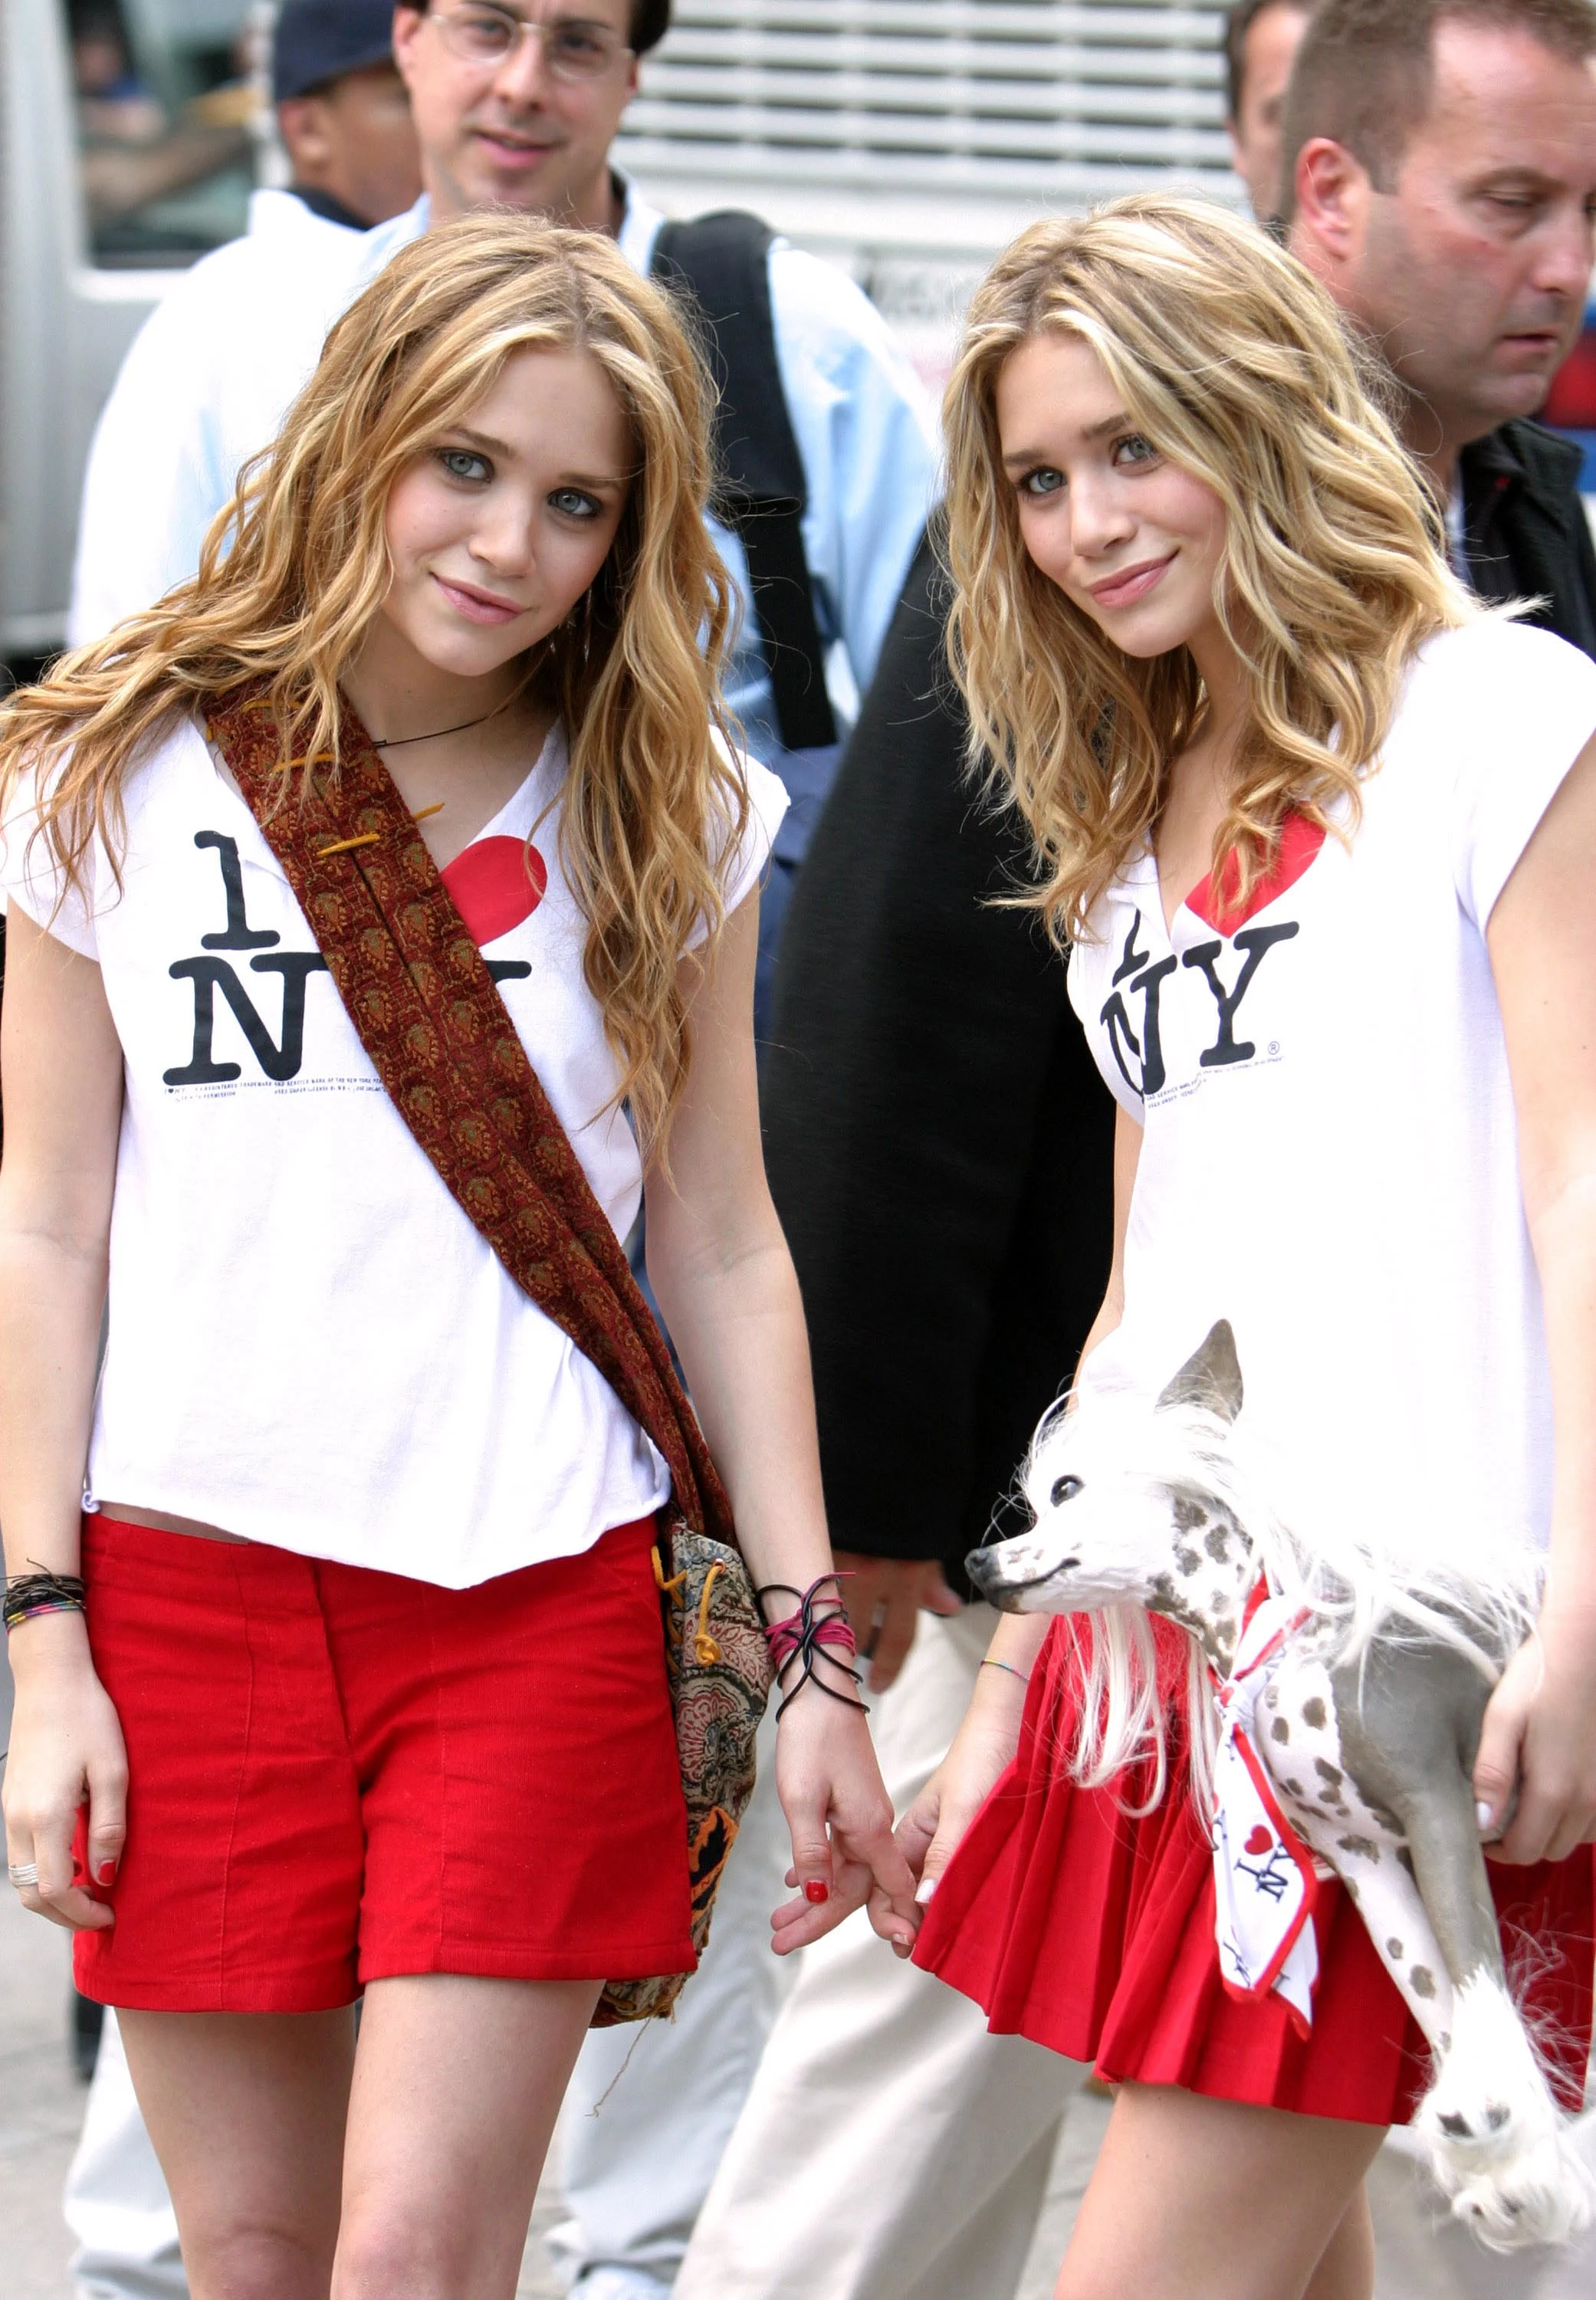 Mary Kate Olsen and Ashley Olsen during "New York Minute" on Location in Manhattan - October 9, 2003 at Midtown Manhattan in New York City, New York, United States. (Photo by James Devaney/WireImage)